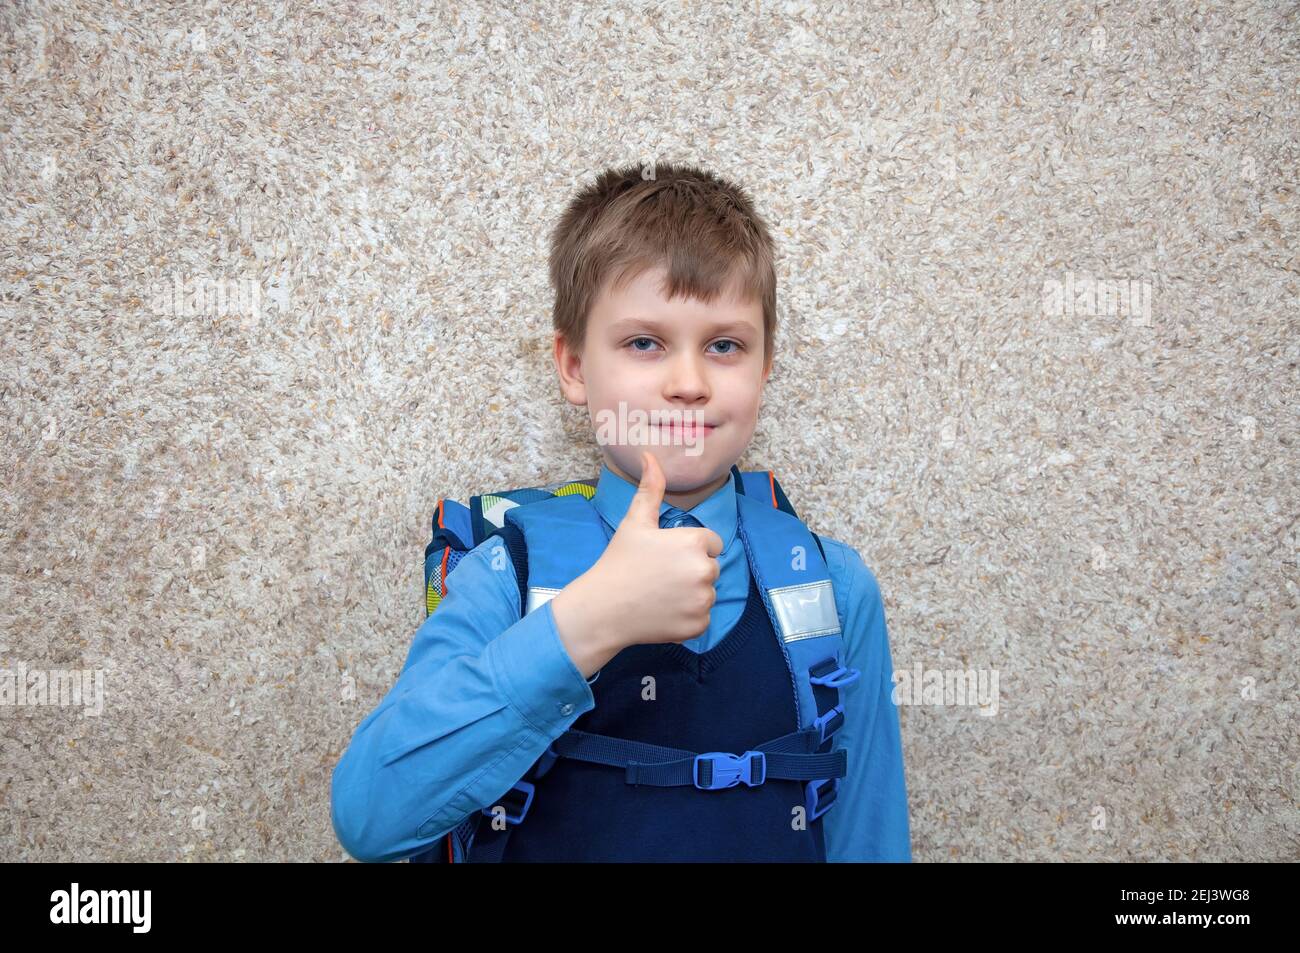 Child with a schoolbag shows the gesture ok. Stock Photo